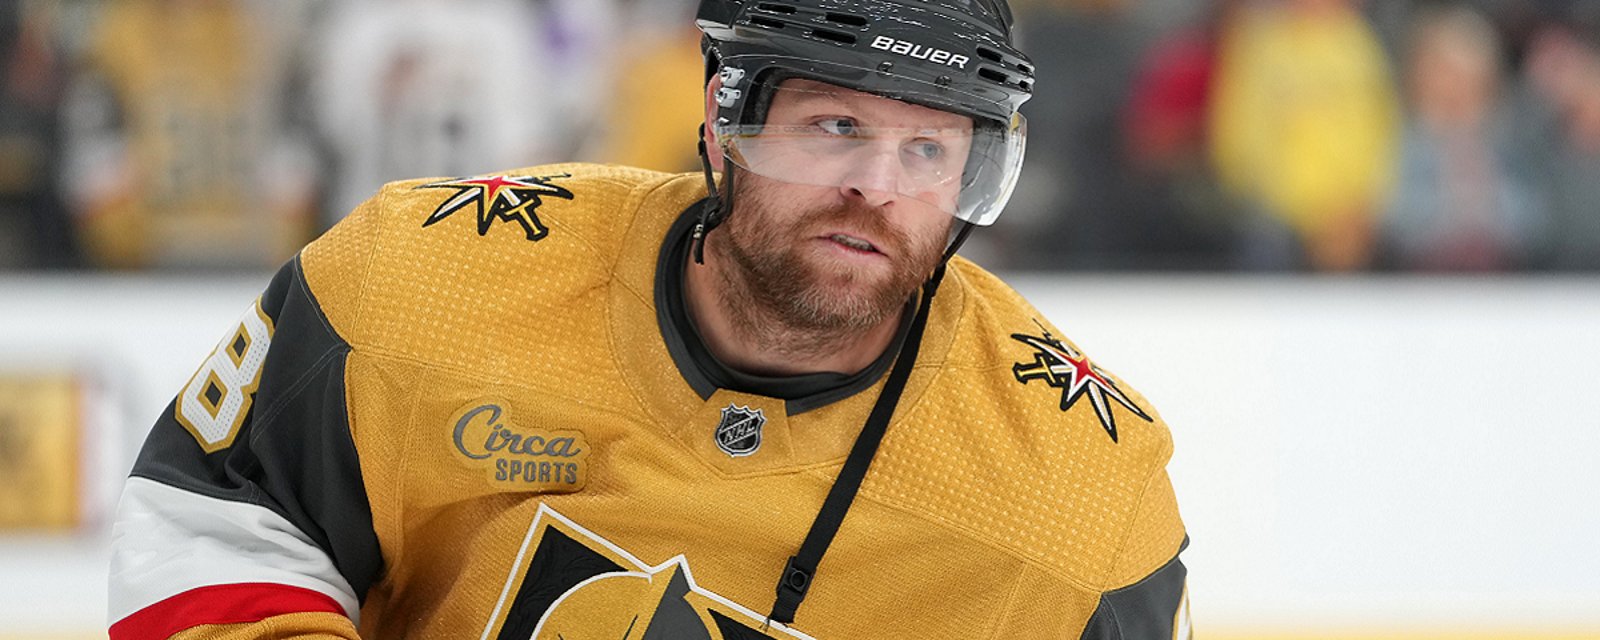 Phil Kessel has been spotted training with an NHL team.